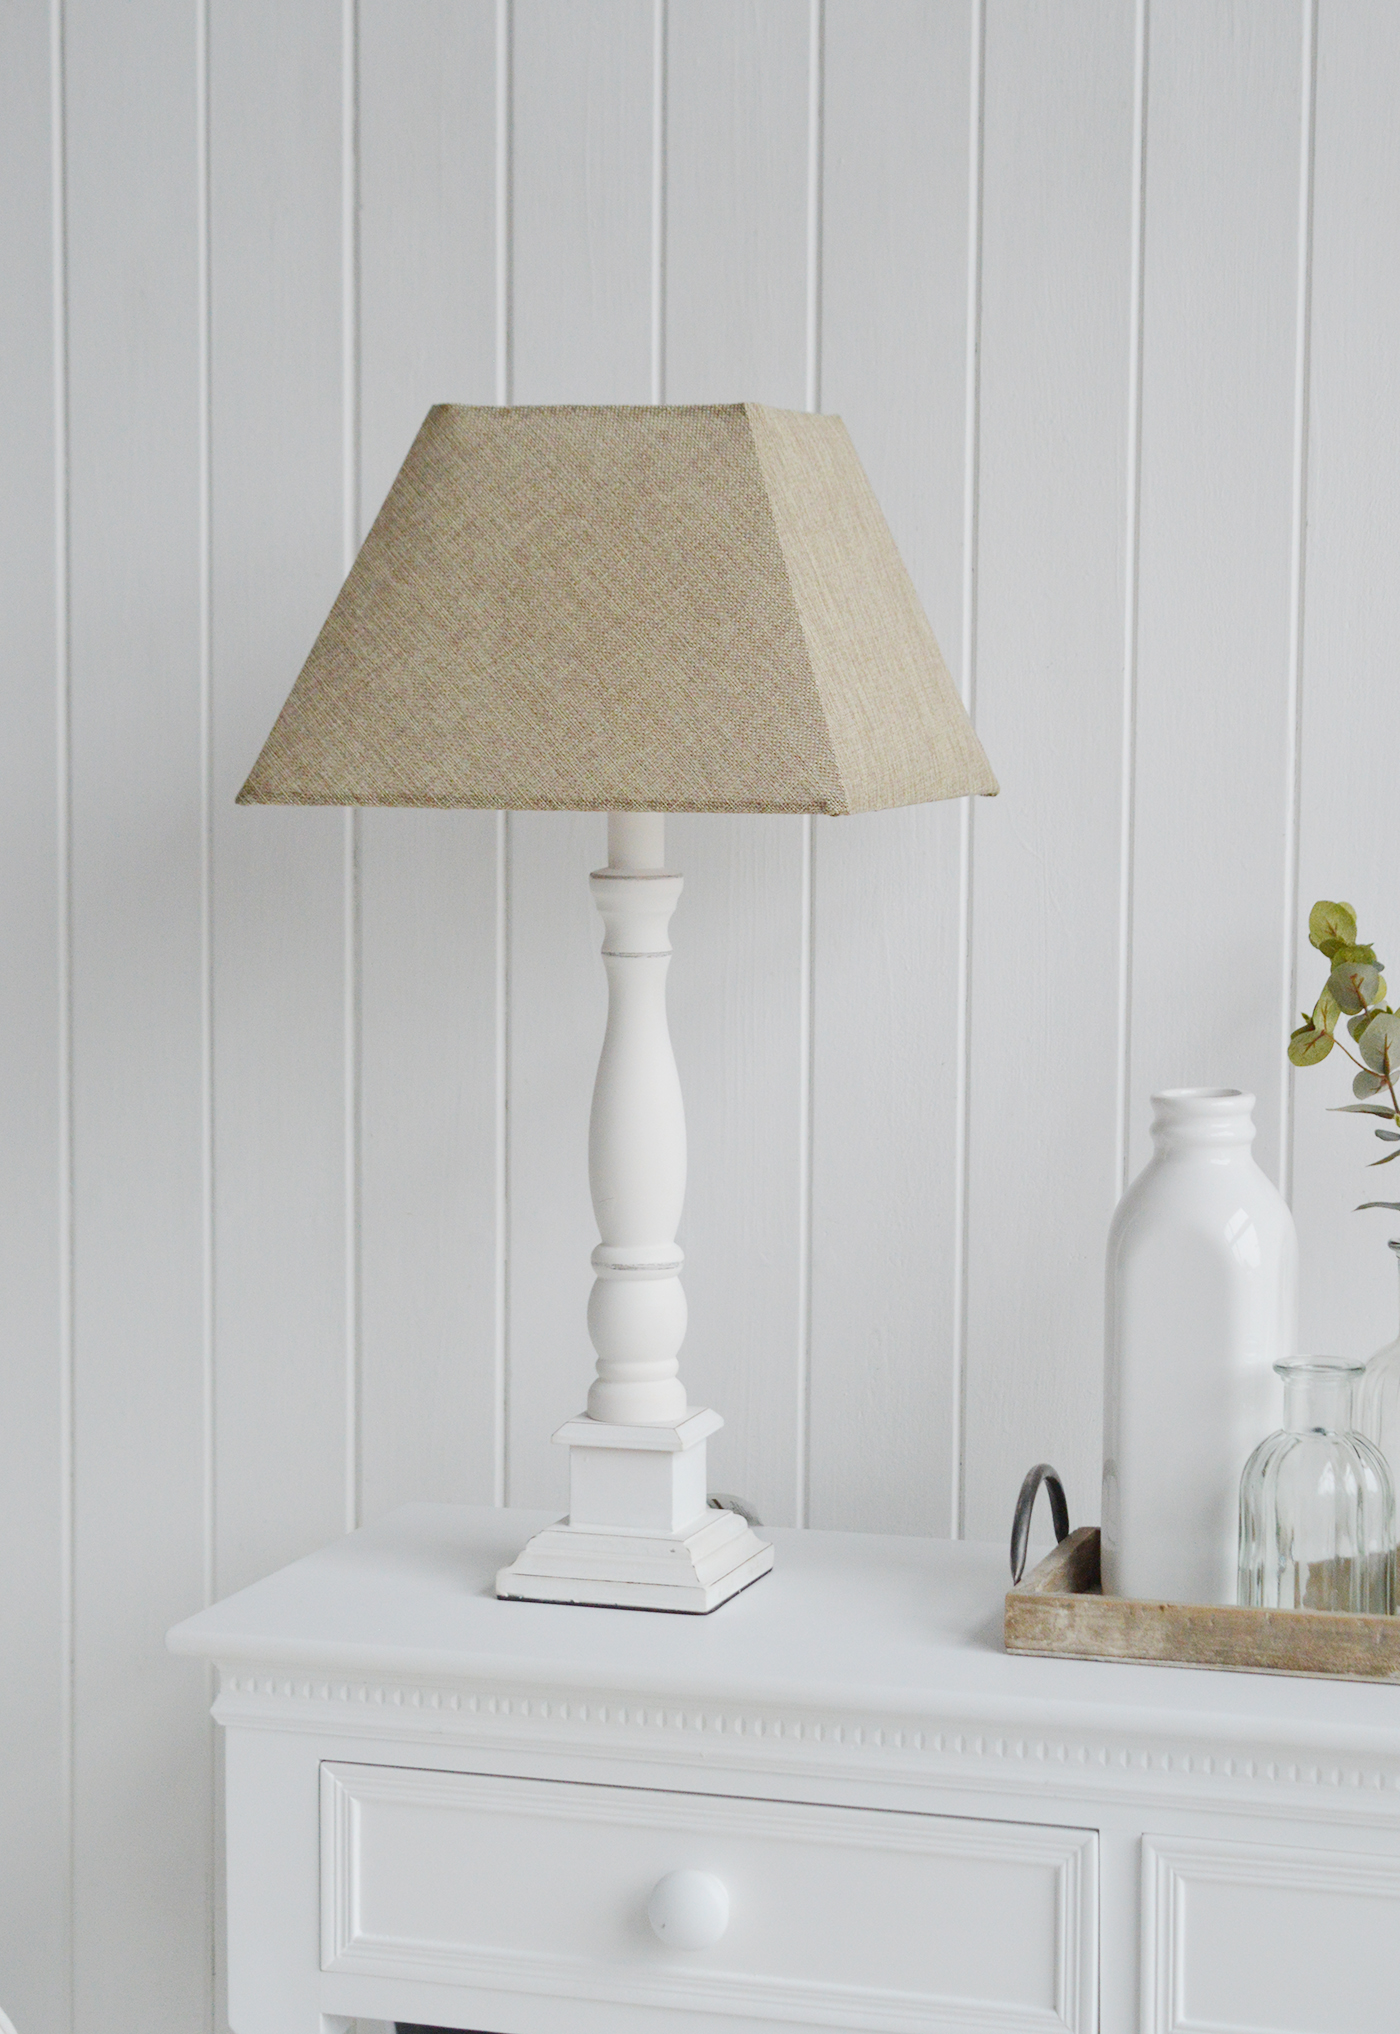 Headington  White Wooden table lamp for New England coastal, city and country home interiors from The White Lighthouse Furniture